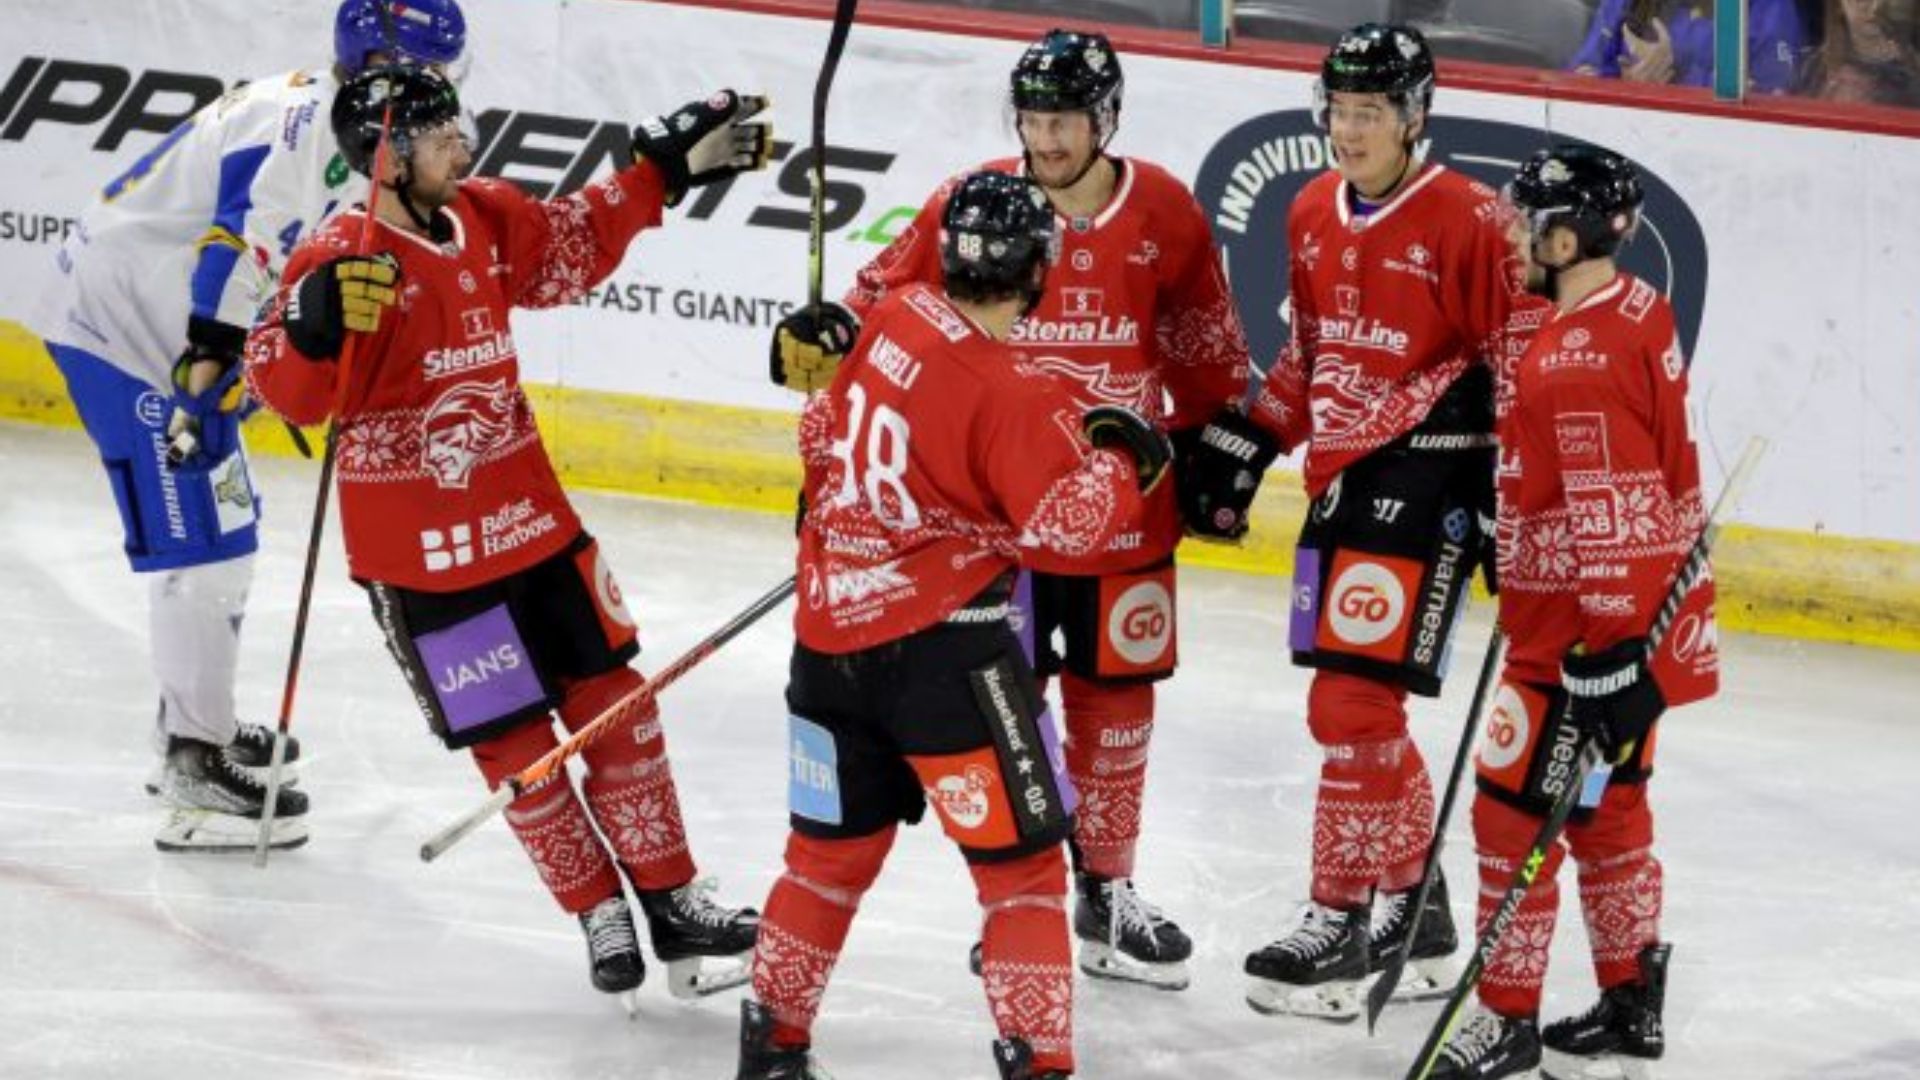 BELFAST GIANTS GIVE FLYERS A BAD DREAM BEFORE X-MAS